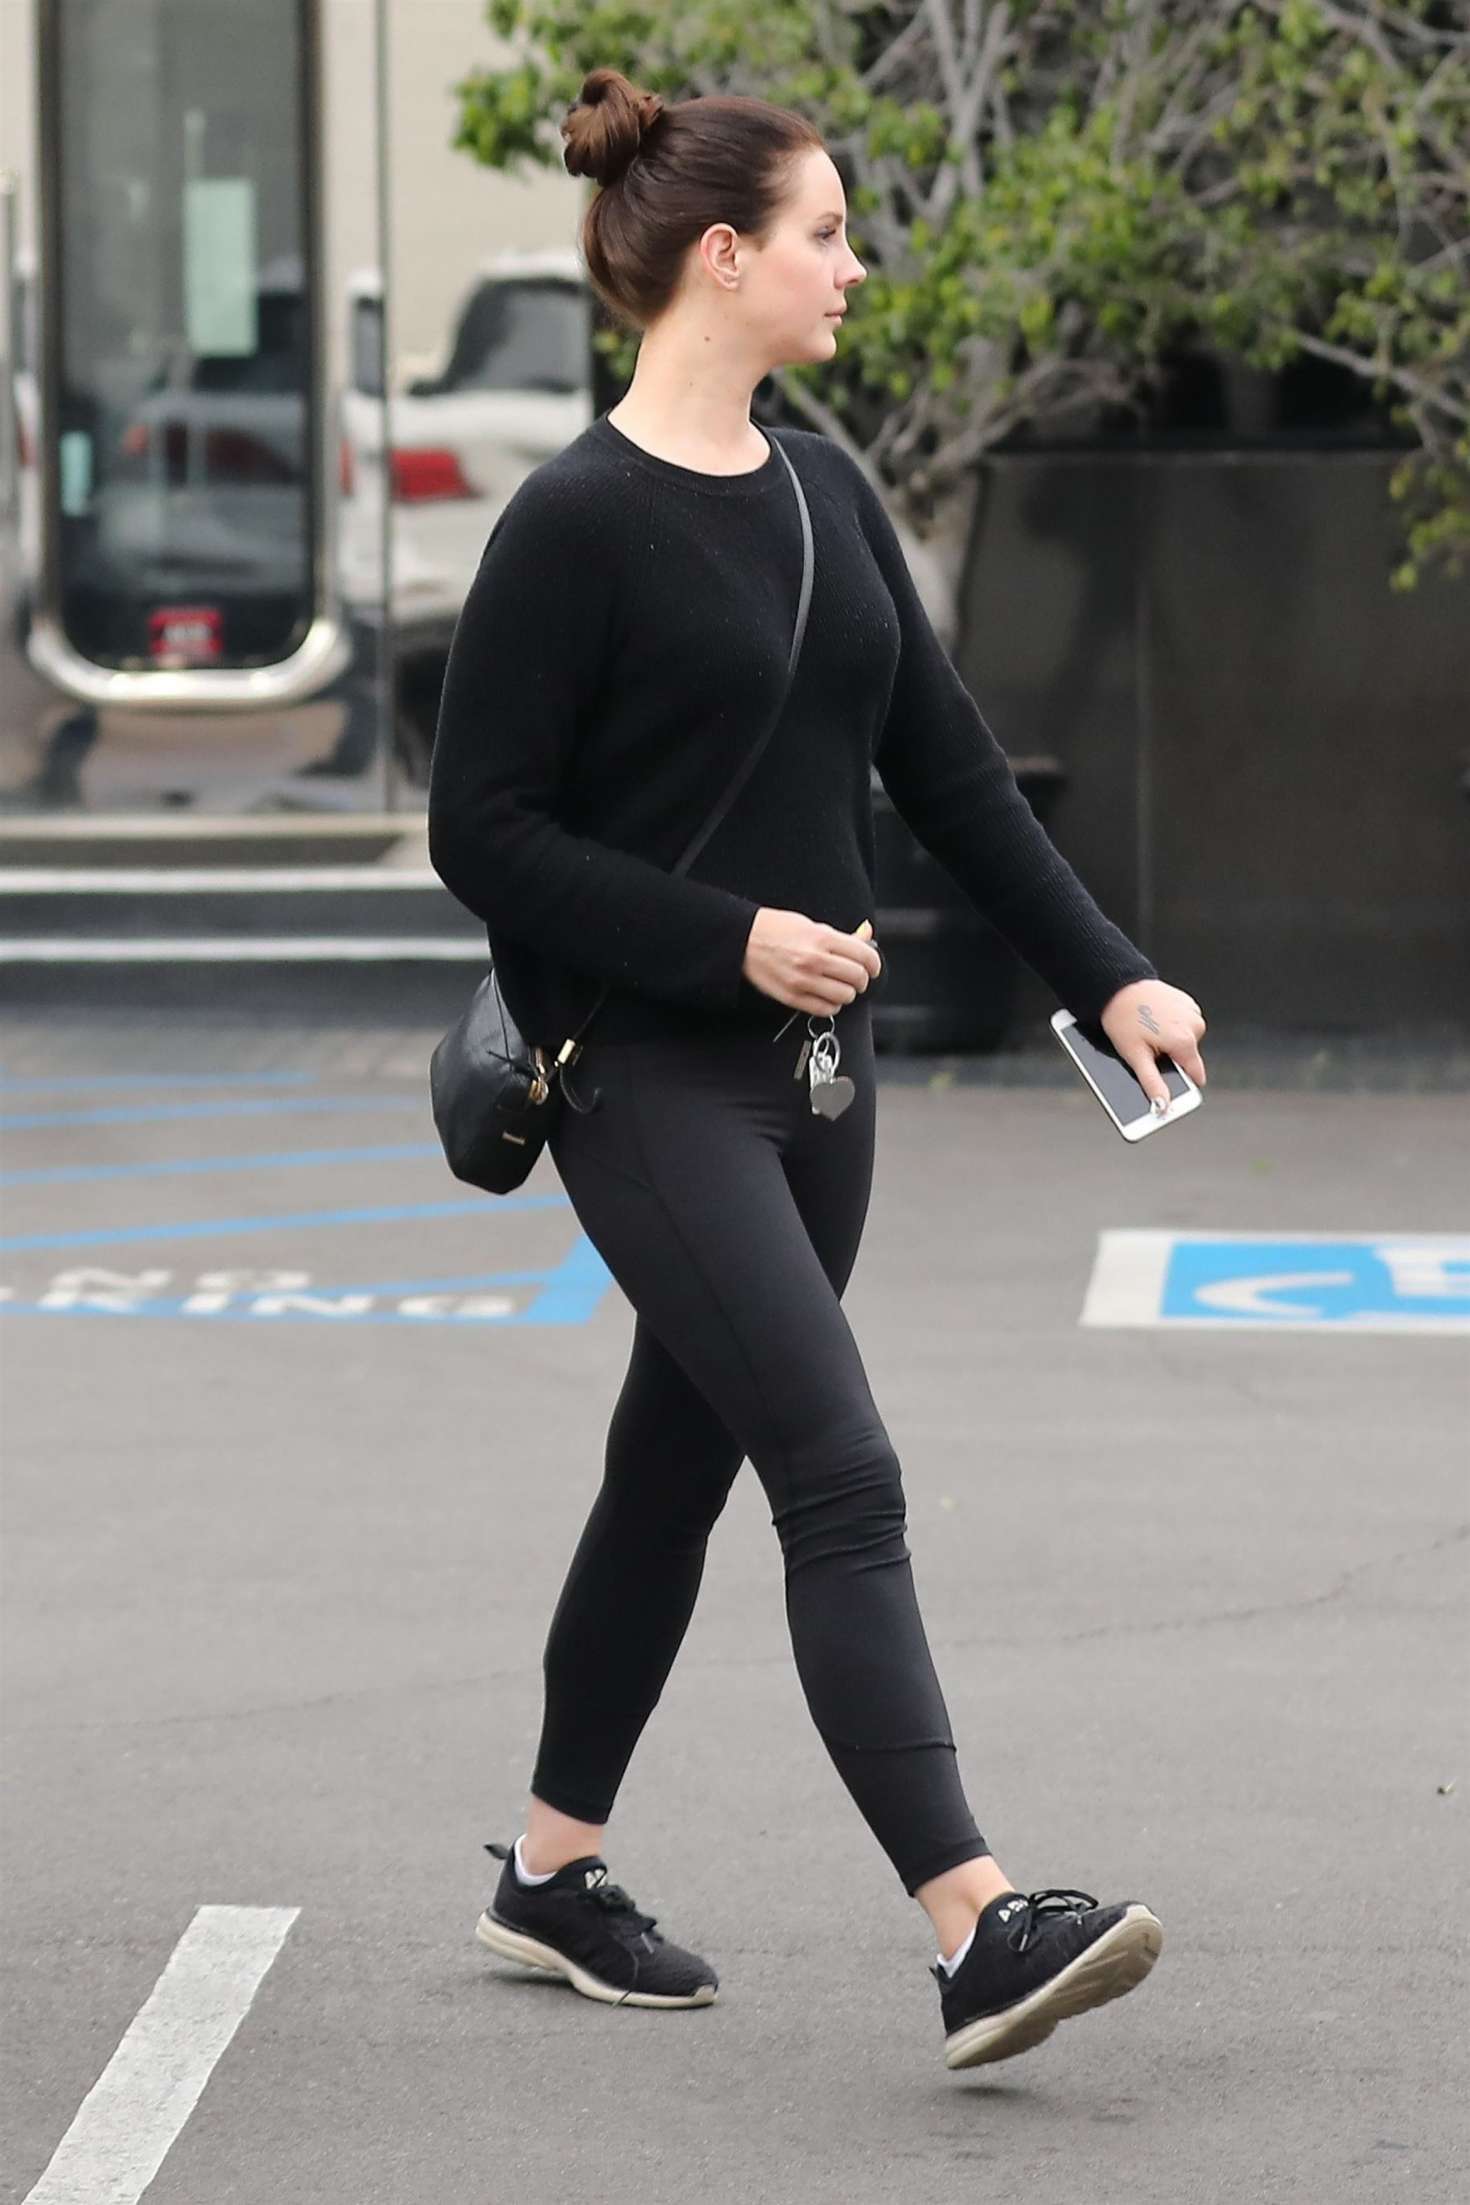 Lana Del Rey in Black Tights â€“ Out in Beverly Hills